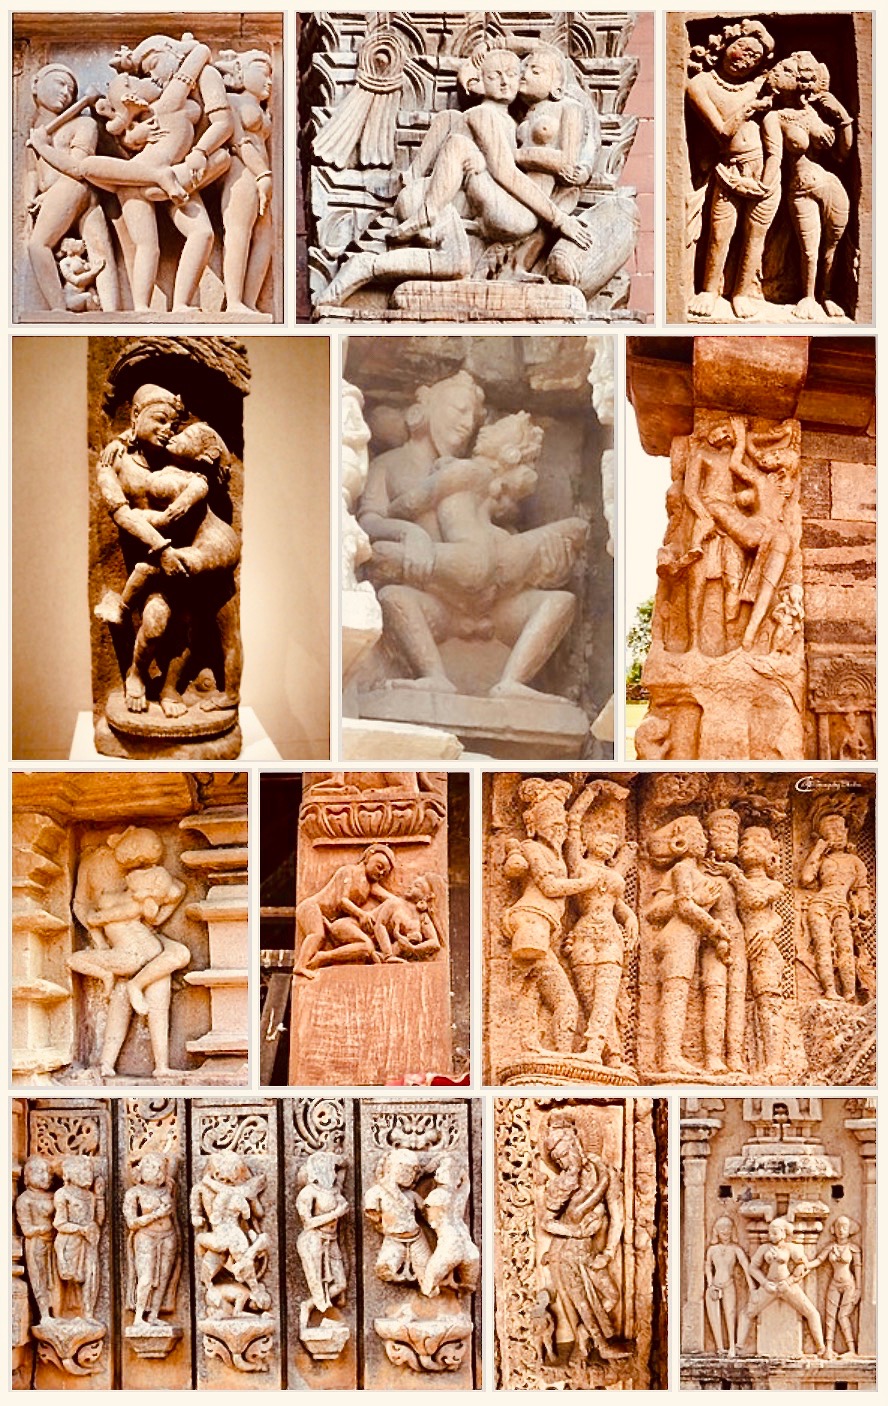 Erotic sandstone statues from ancient temples